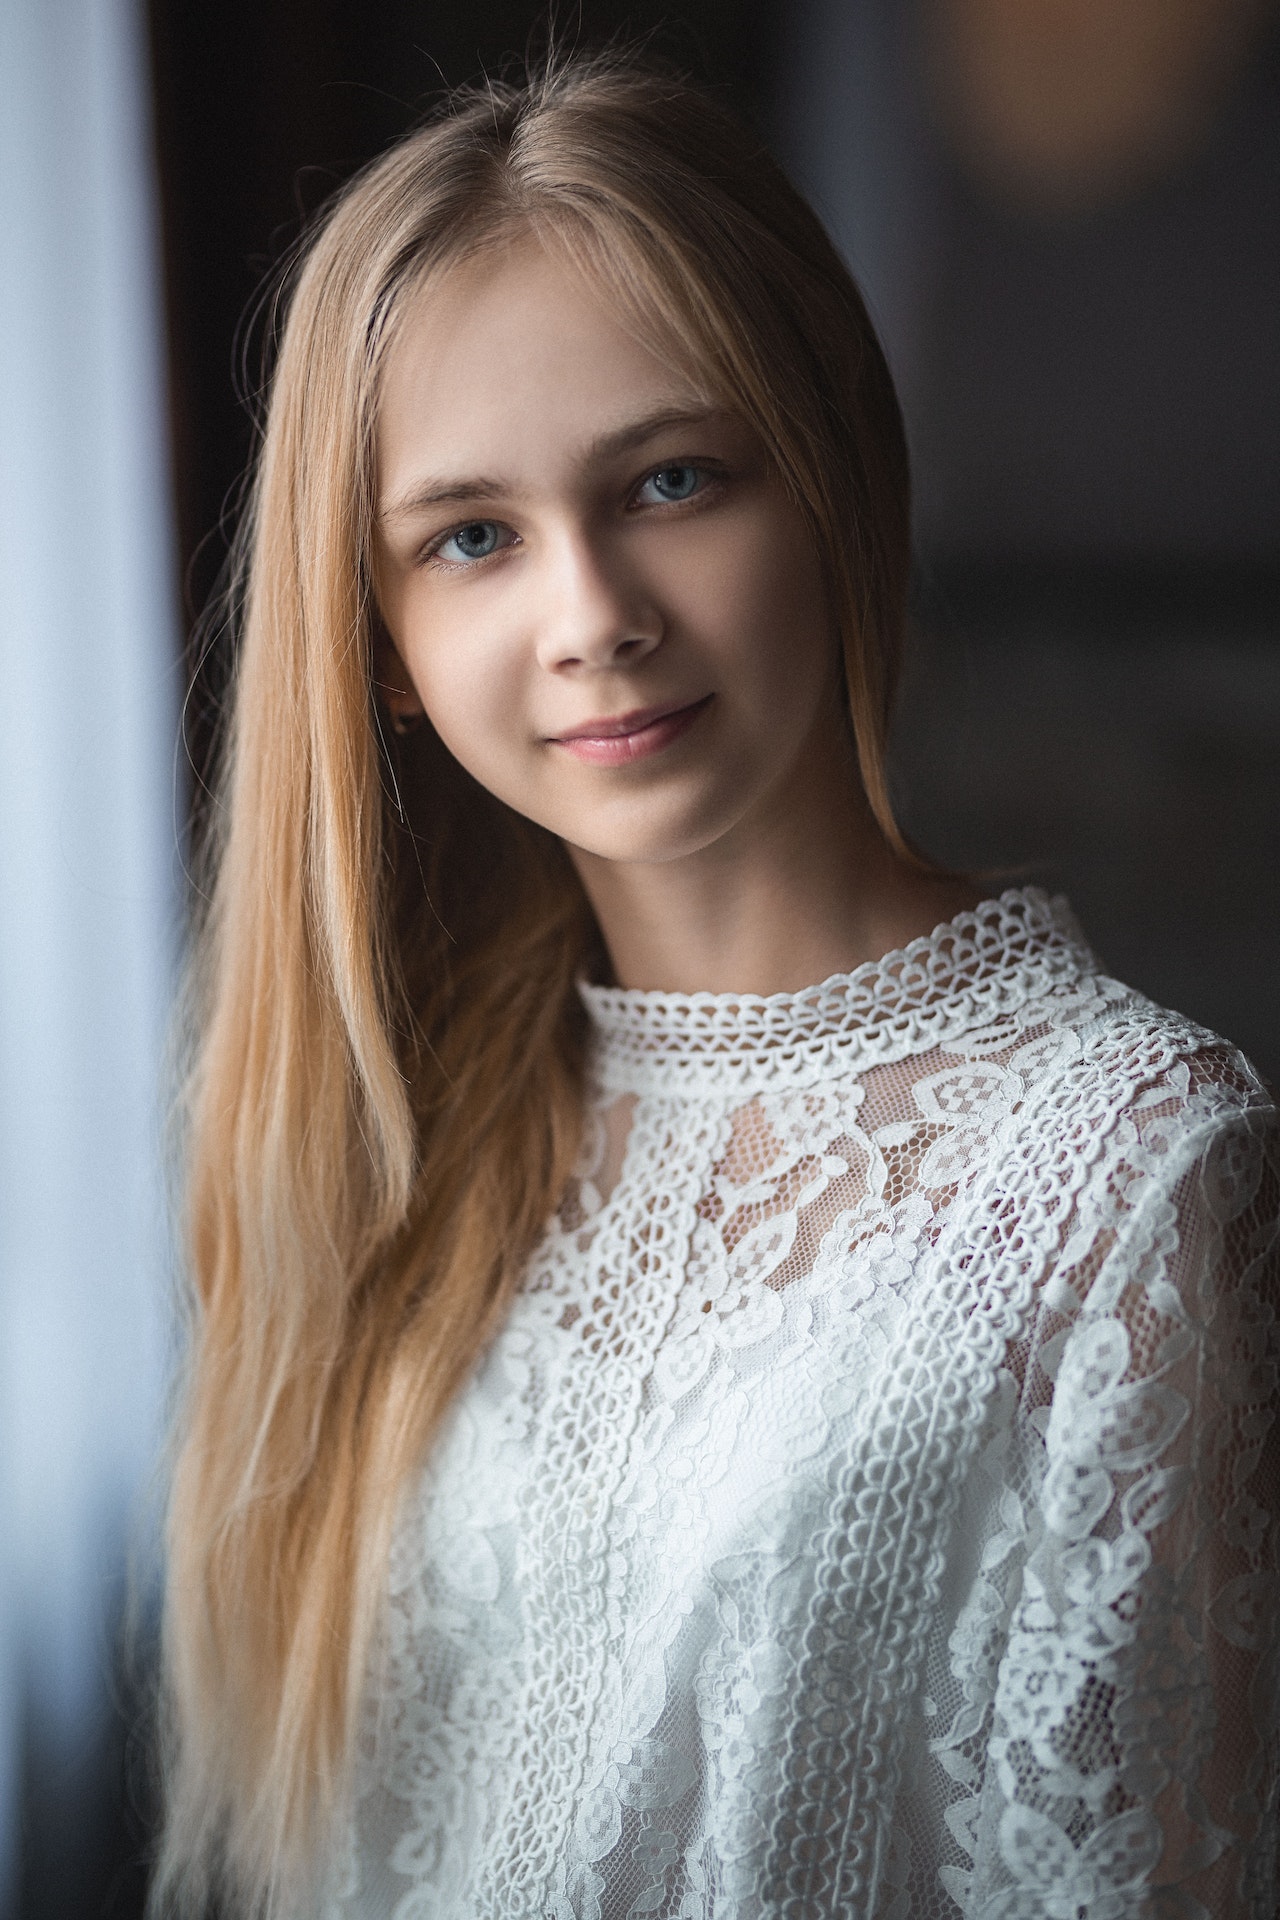 Photo of Caucasian teen girl with blond hair smiling slightly and wearing a lace blouse. Photo could represent the happiness she feels over having less anxiety due to online solution focused brief therapy in Illinois.